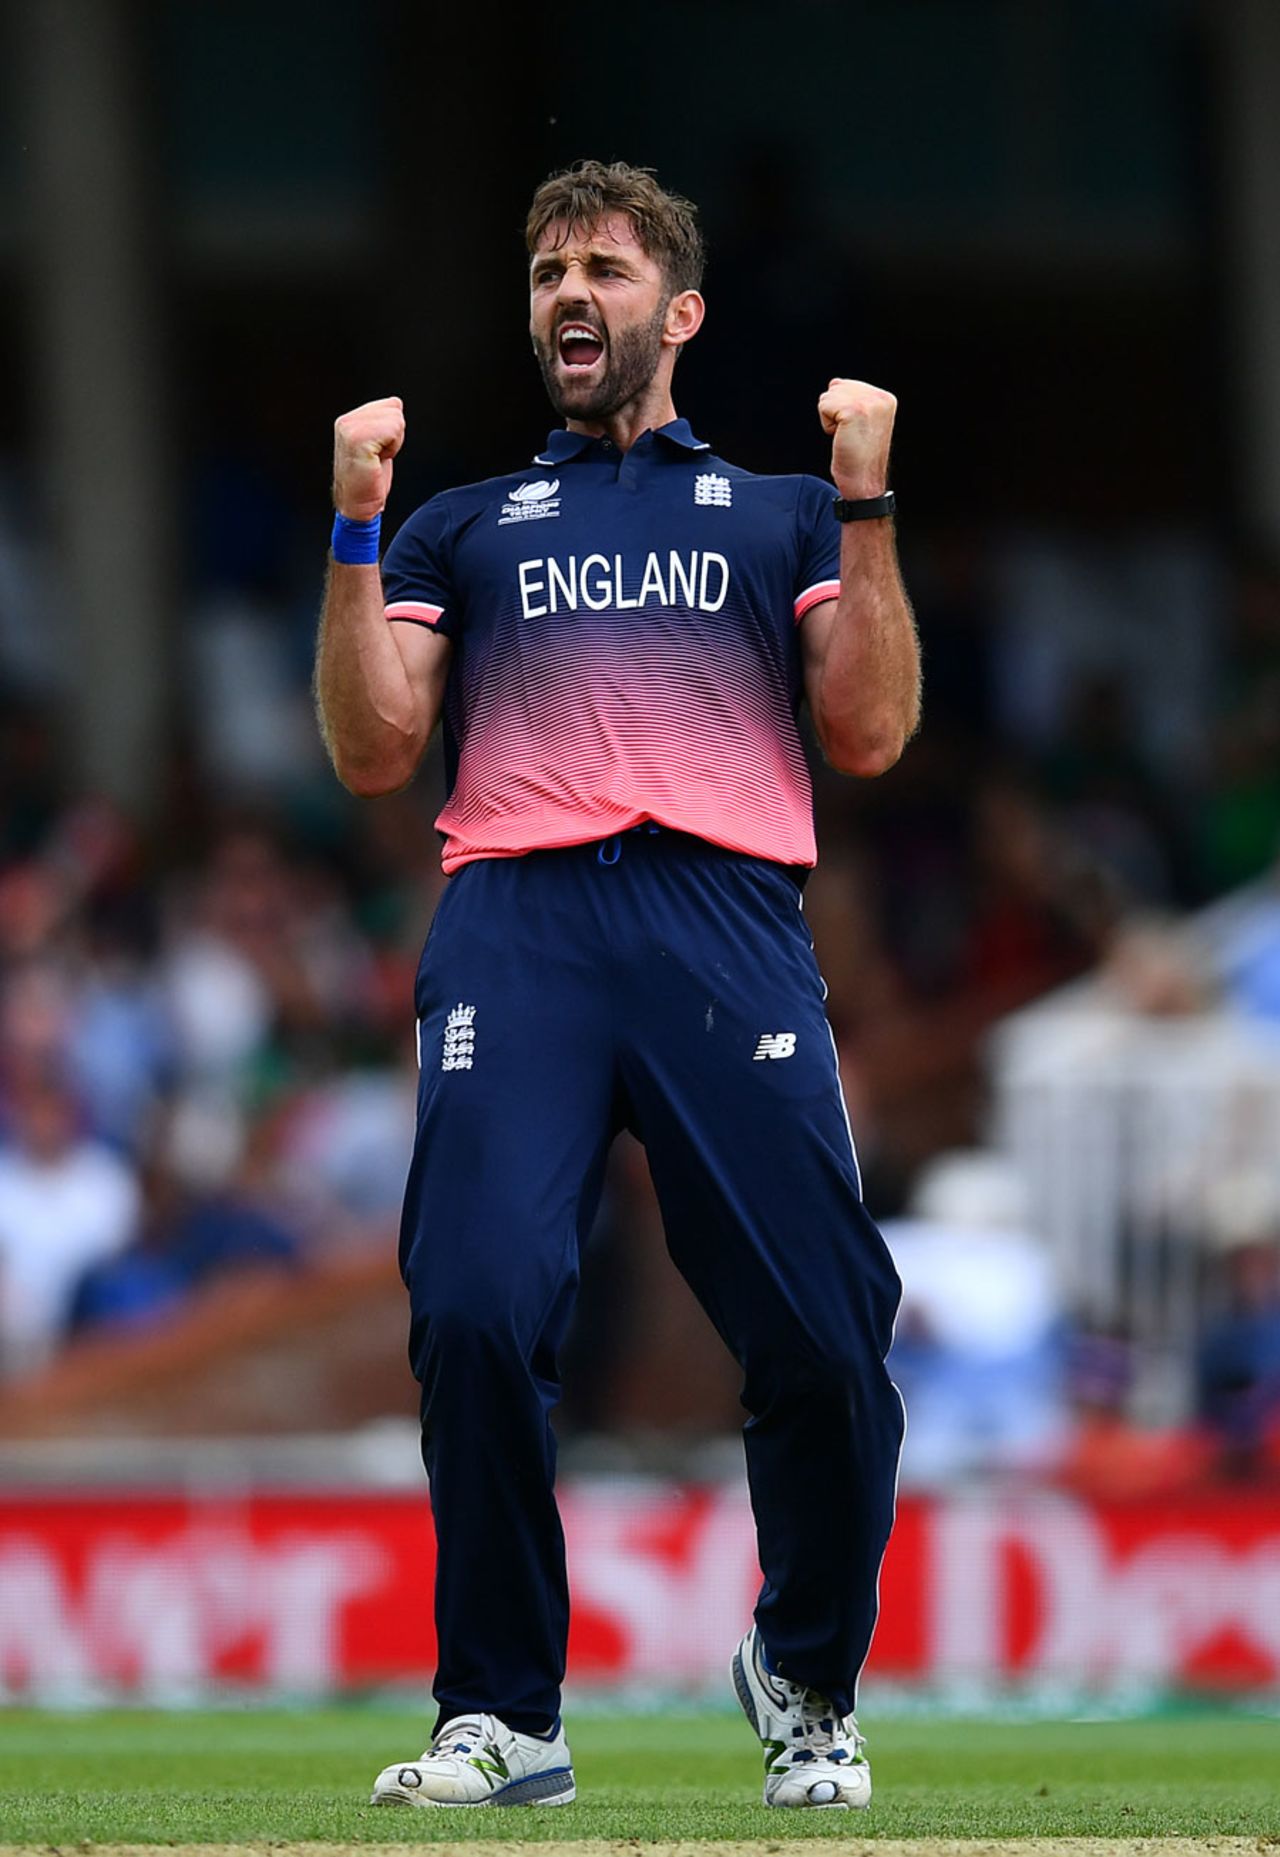 Liam Plunkett finished with a four-wicket haul, England v Bangladesh, Champions Trophy, Group A, The Oval, June 1, 2017